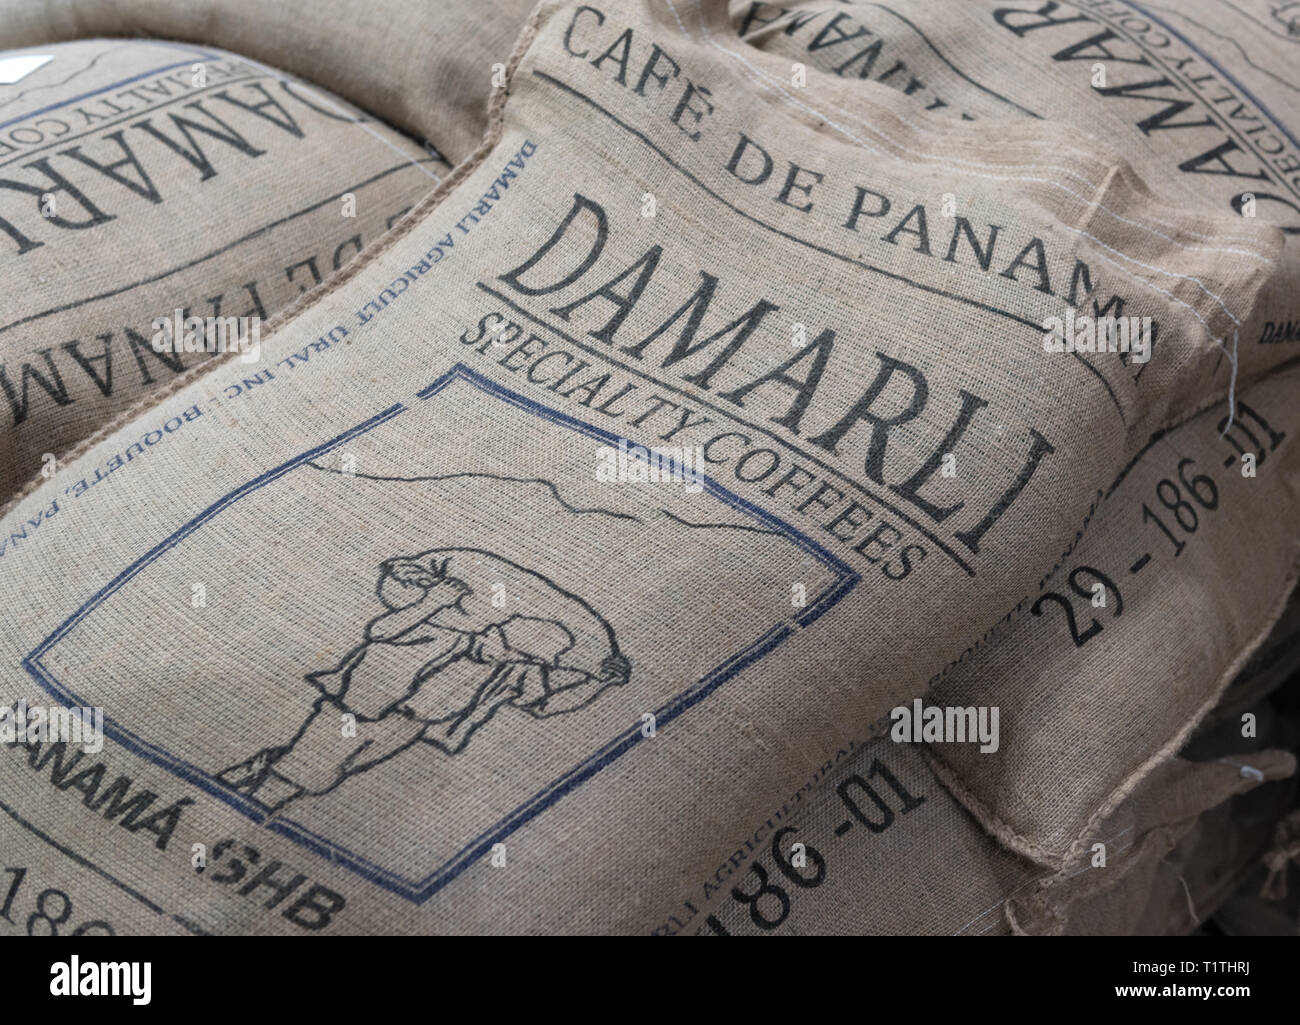 coffee beans packed in jute bags for export Stock Photo